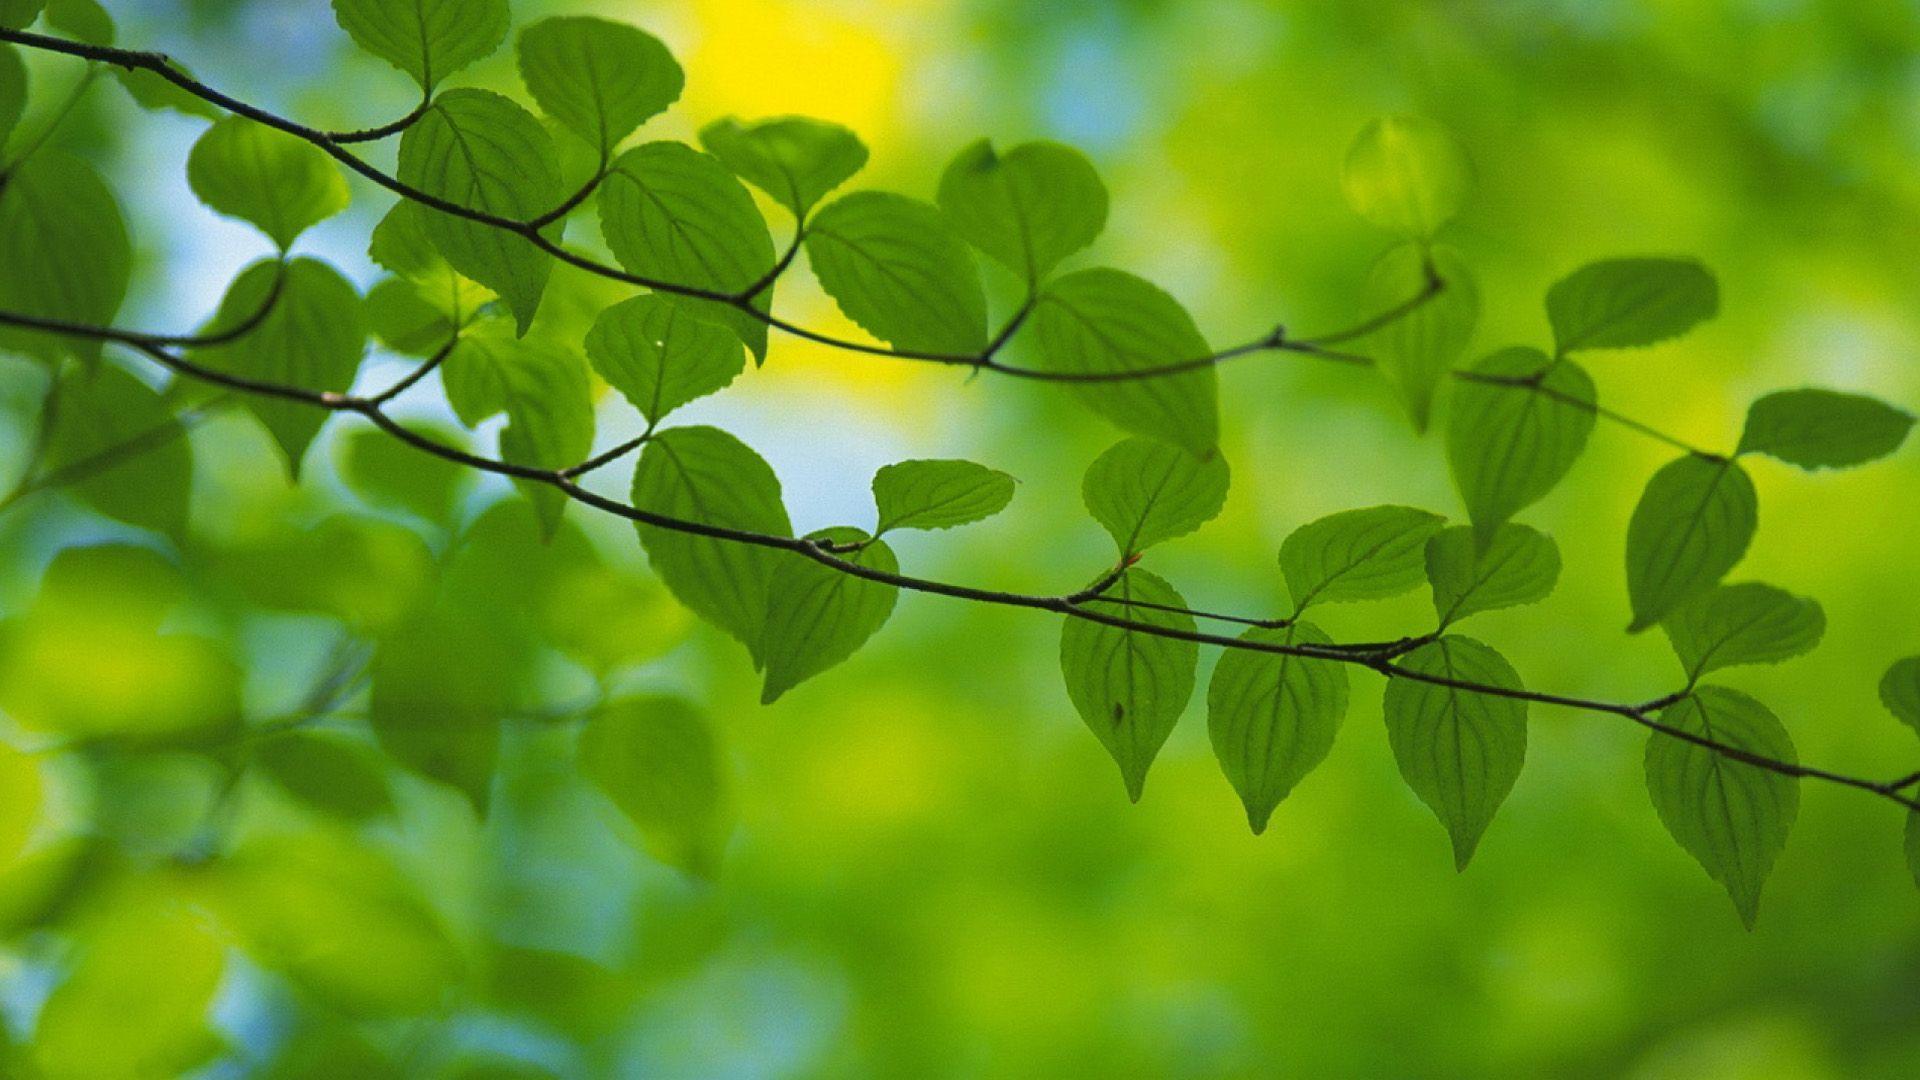 Closeup nature view of green leaf on blurred greenery background posters  for the wall  posters water wallpaper vitality  myloviewcom